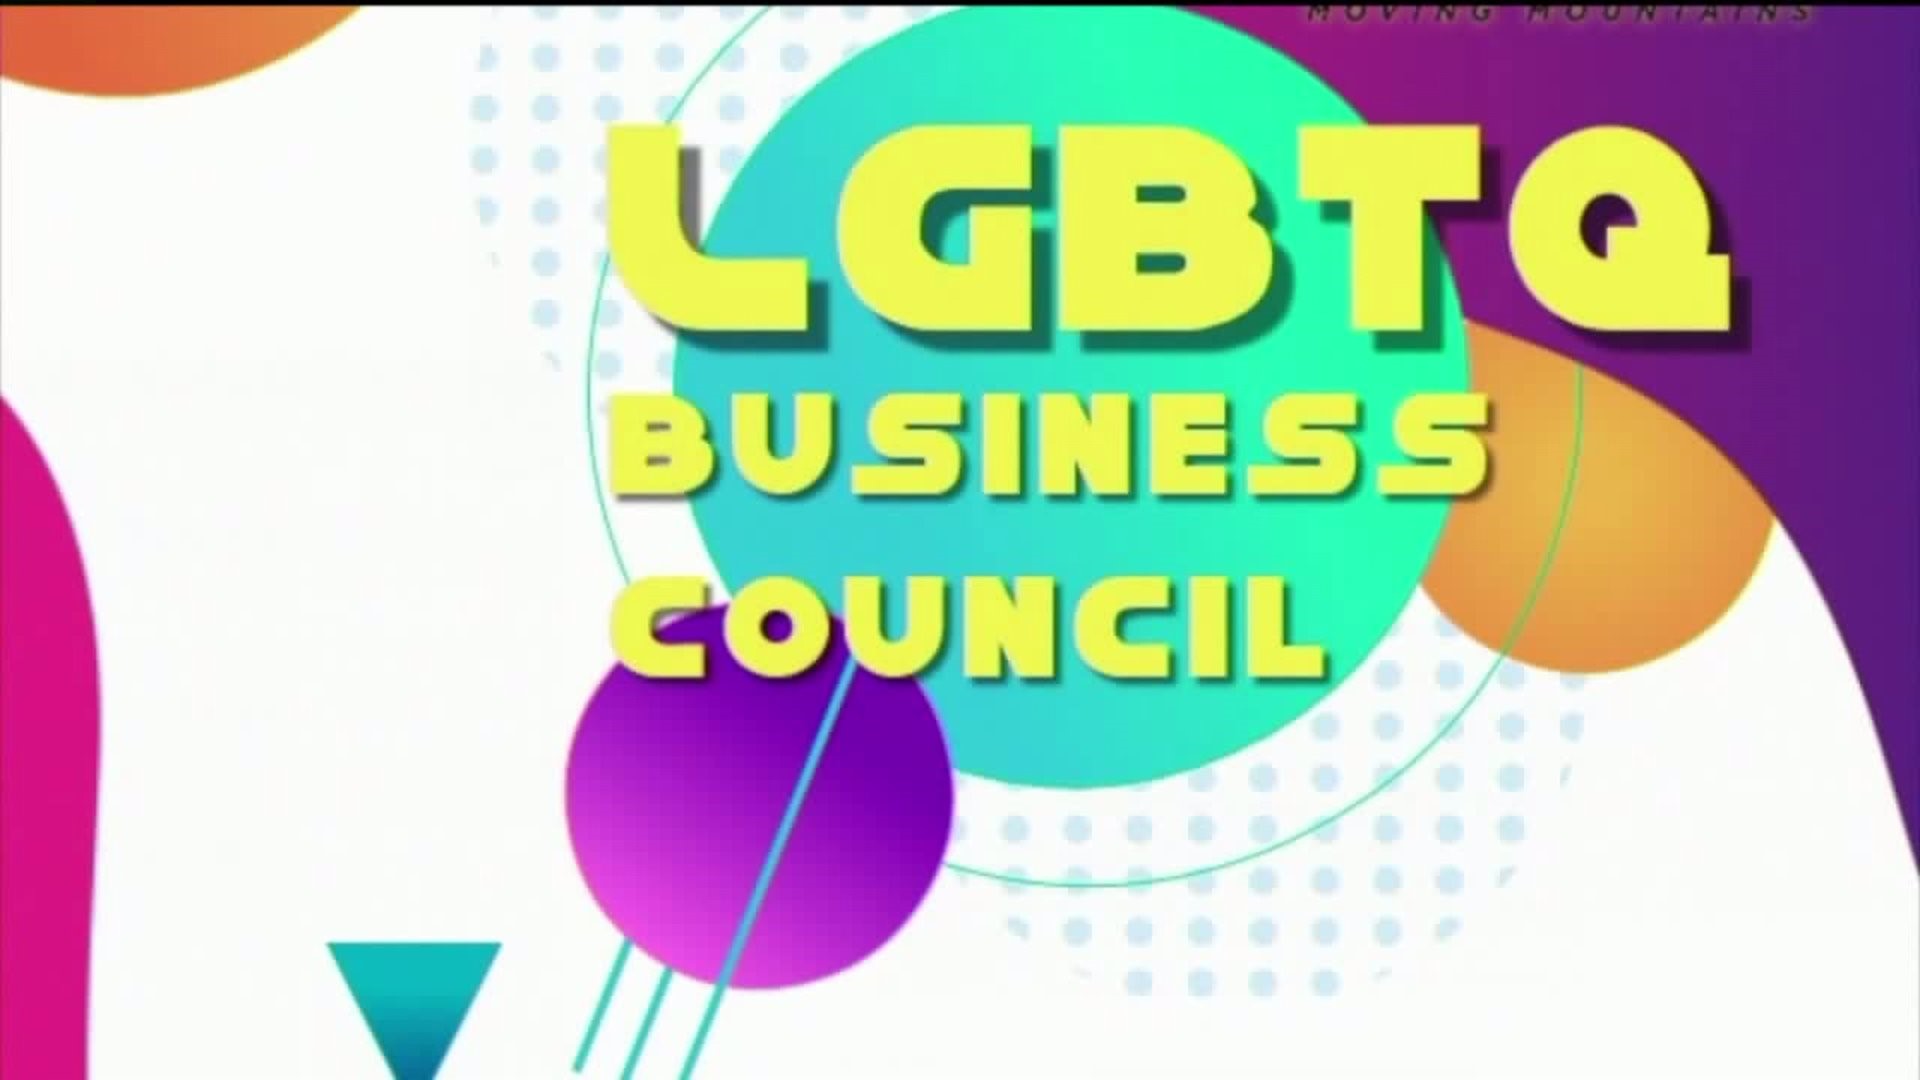 New Business Council Focuses on LGBTQ Community